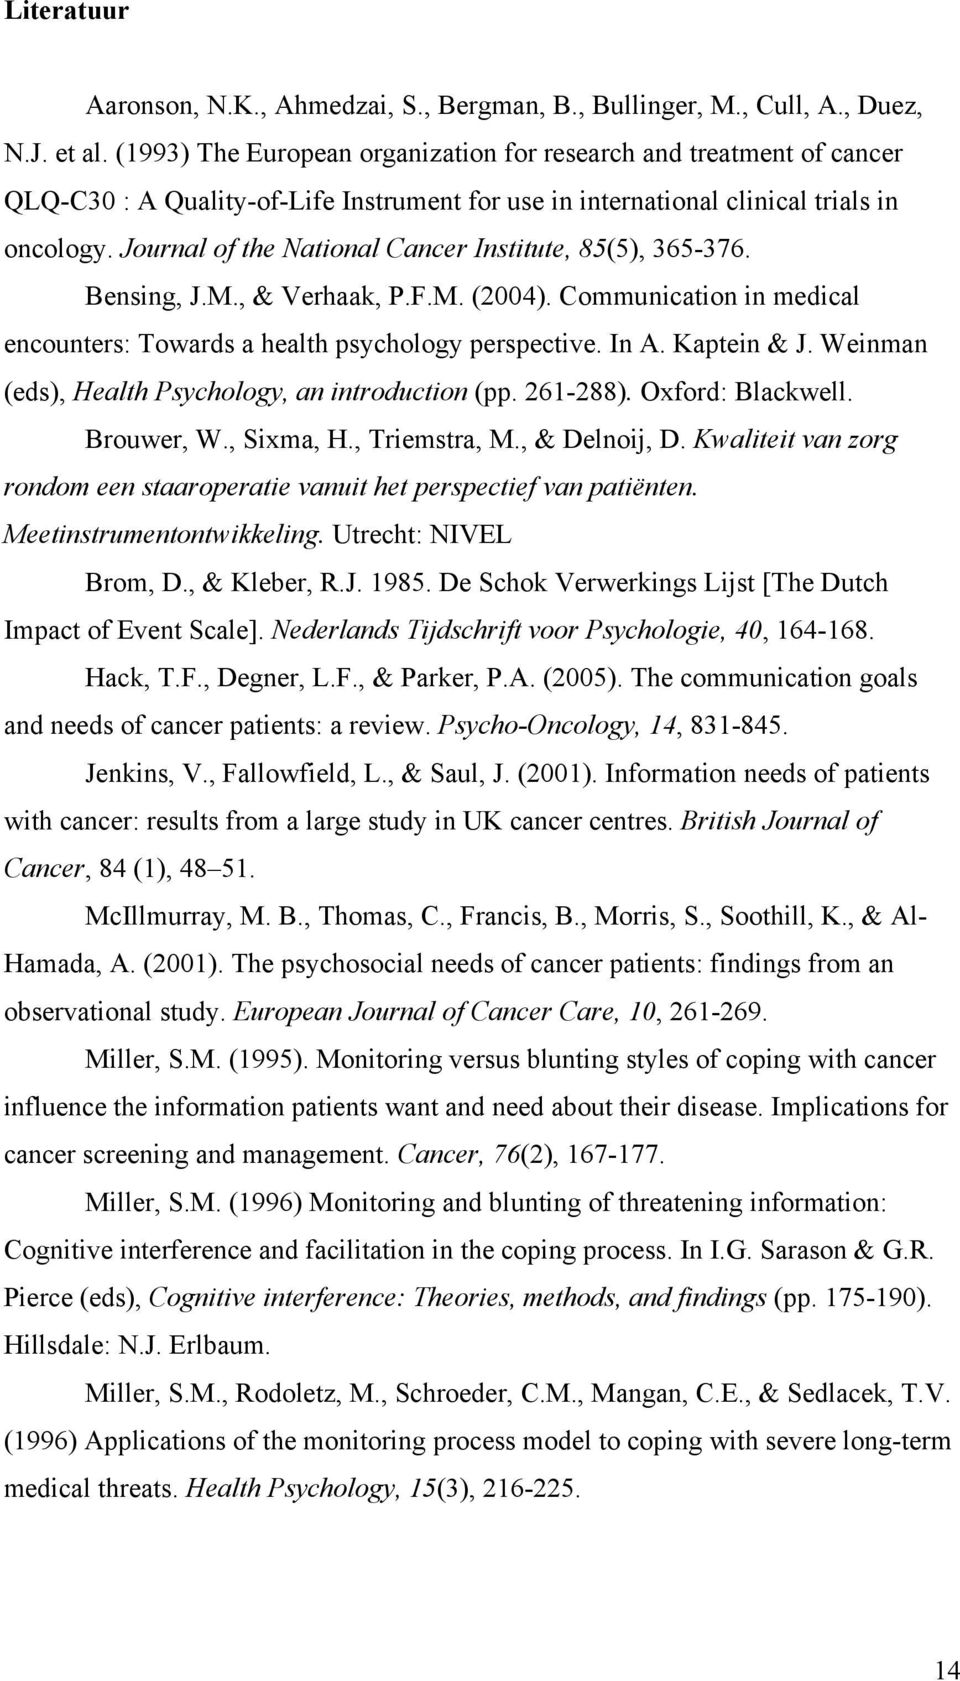 Journal of the National Cancer Institute, 85(5), 365-376. Bensing, J.M., & Verhaak, P.F.M. (2004). Communication in medical encounters: Towards a health psychology perspective. In A. Kaptein & J.